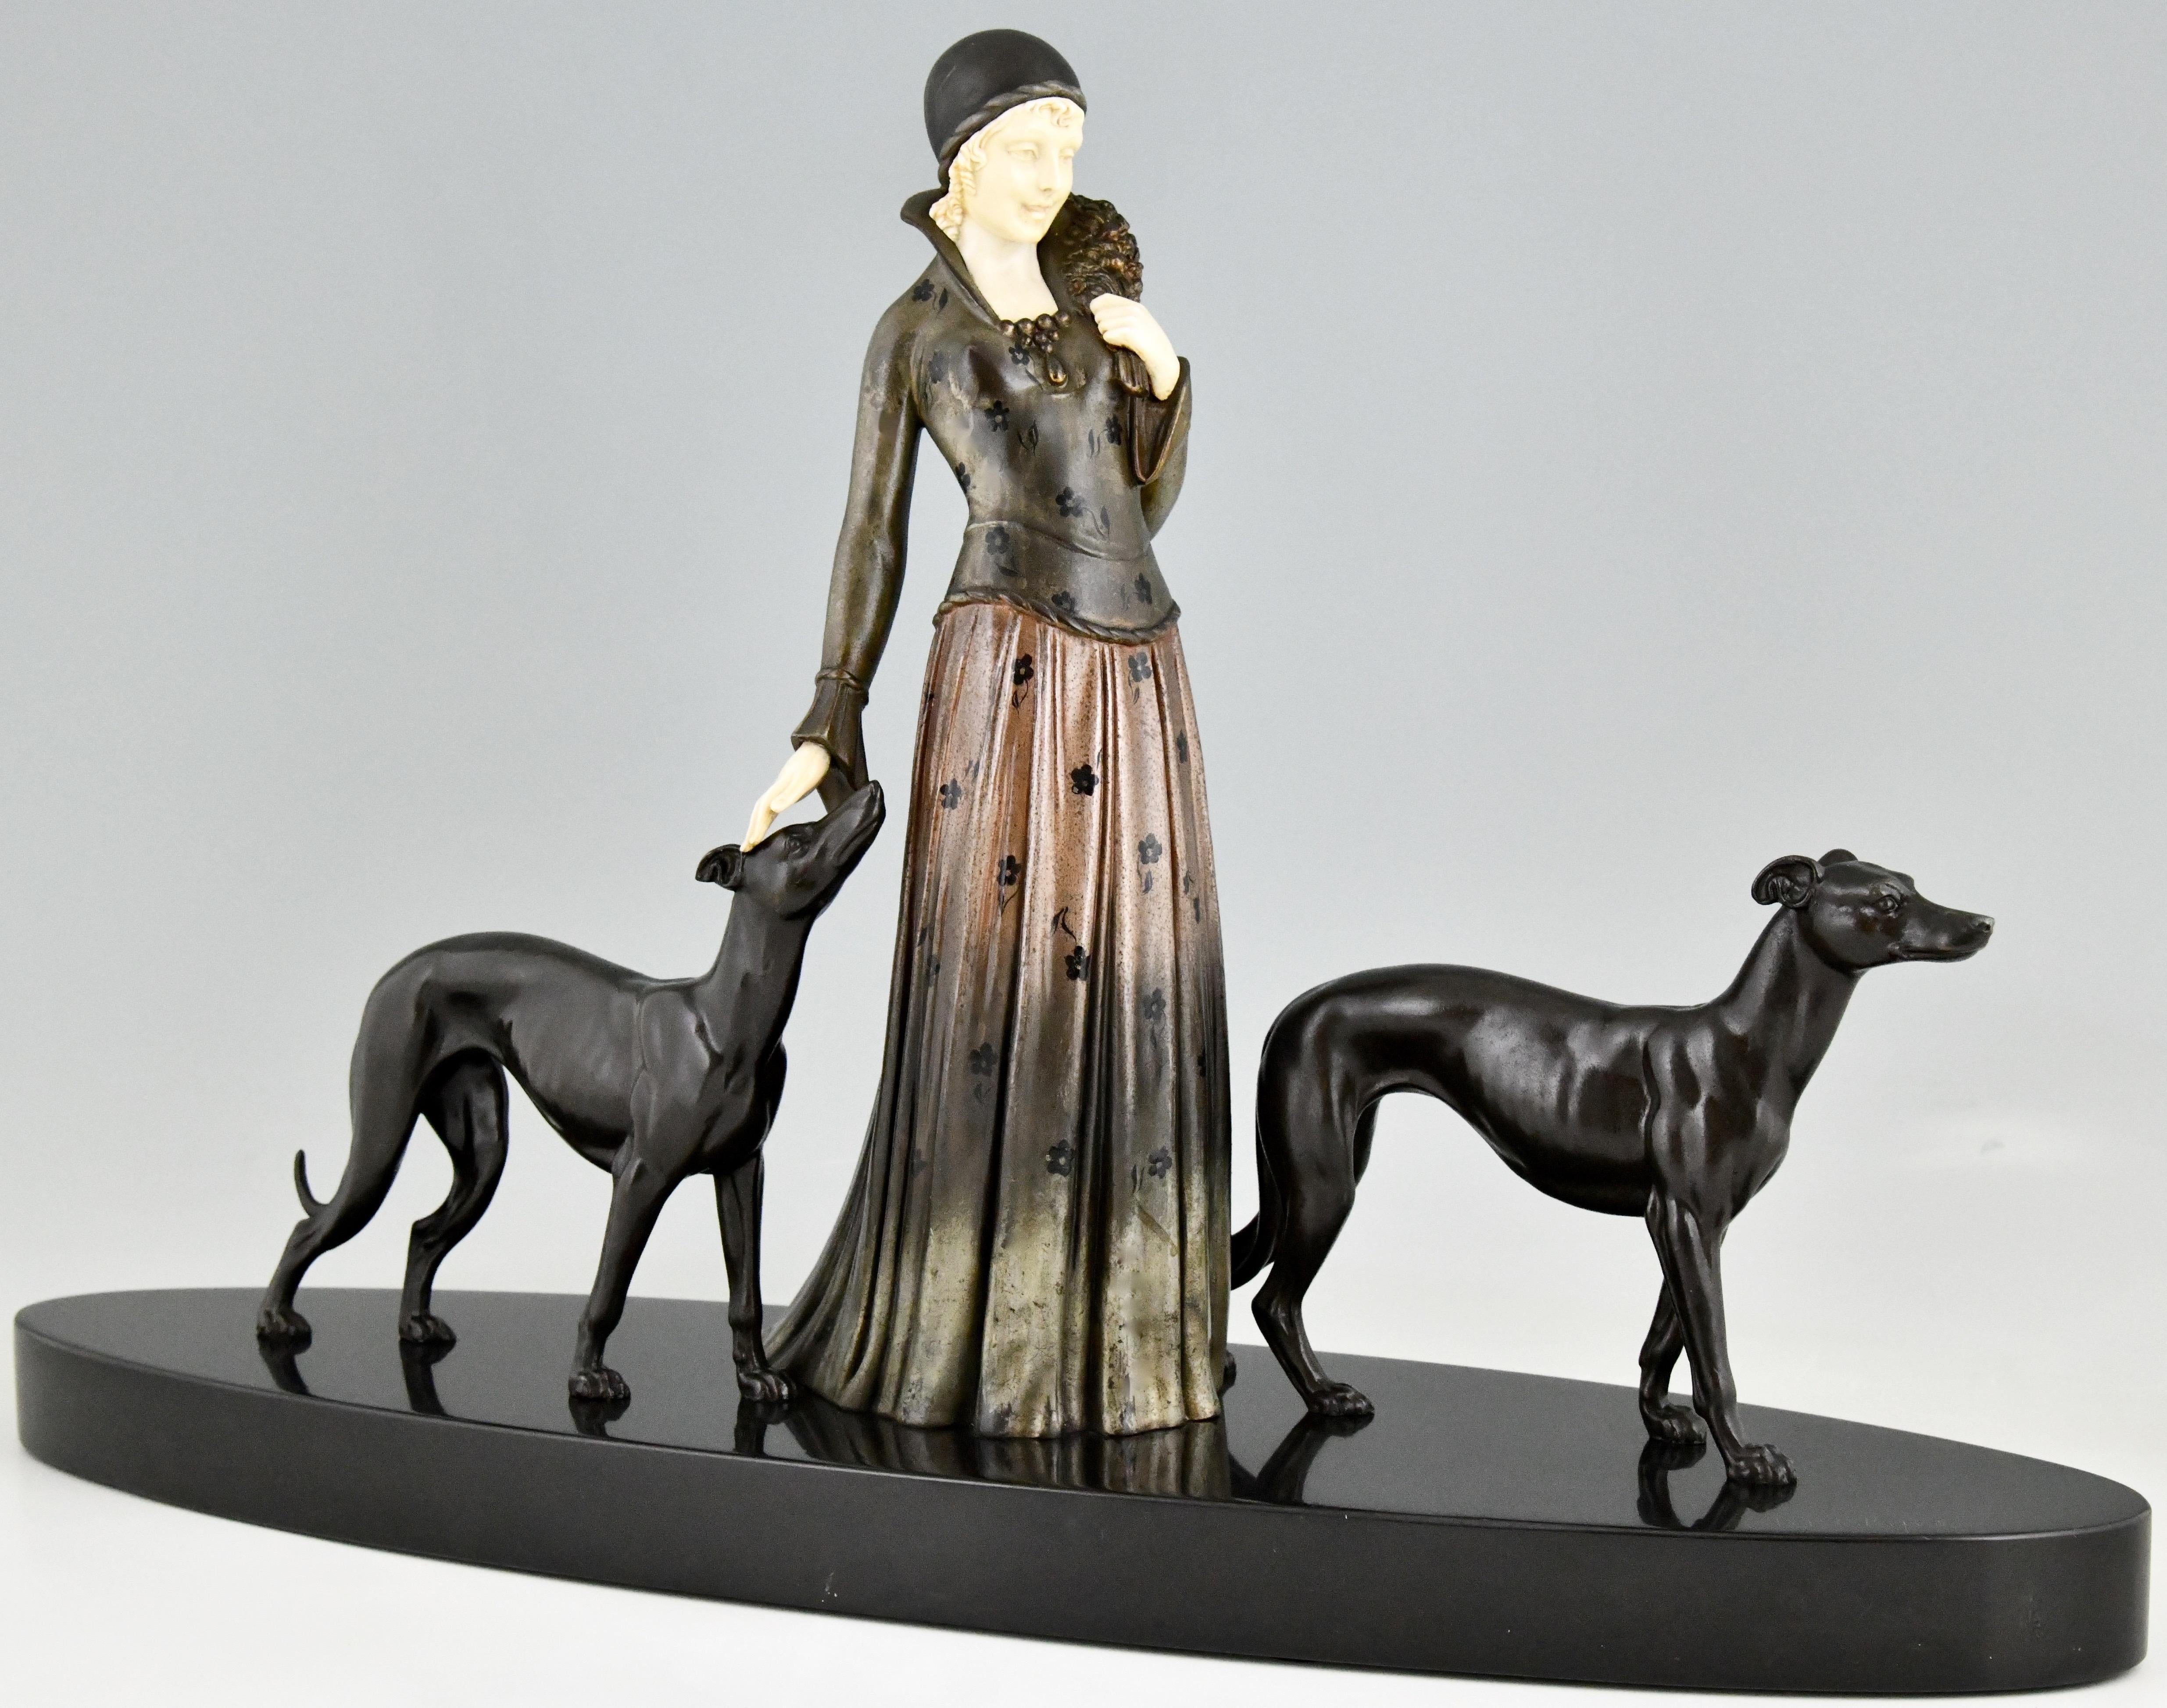 Art Deco sculpture lady with greyhound dogs by Demetre Chiparus on an oval Belgian black marble base. The statue is executed in patinated metal, face and hands of the woman are in ivorine. The dress has very fine details.
This model is illustrated